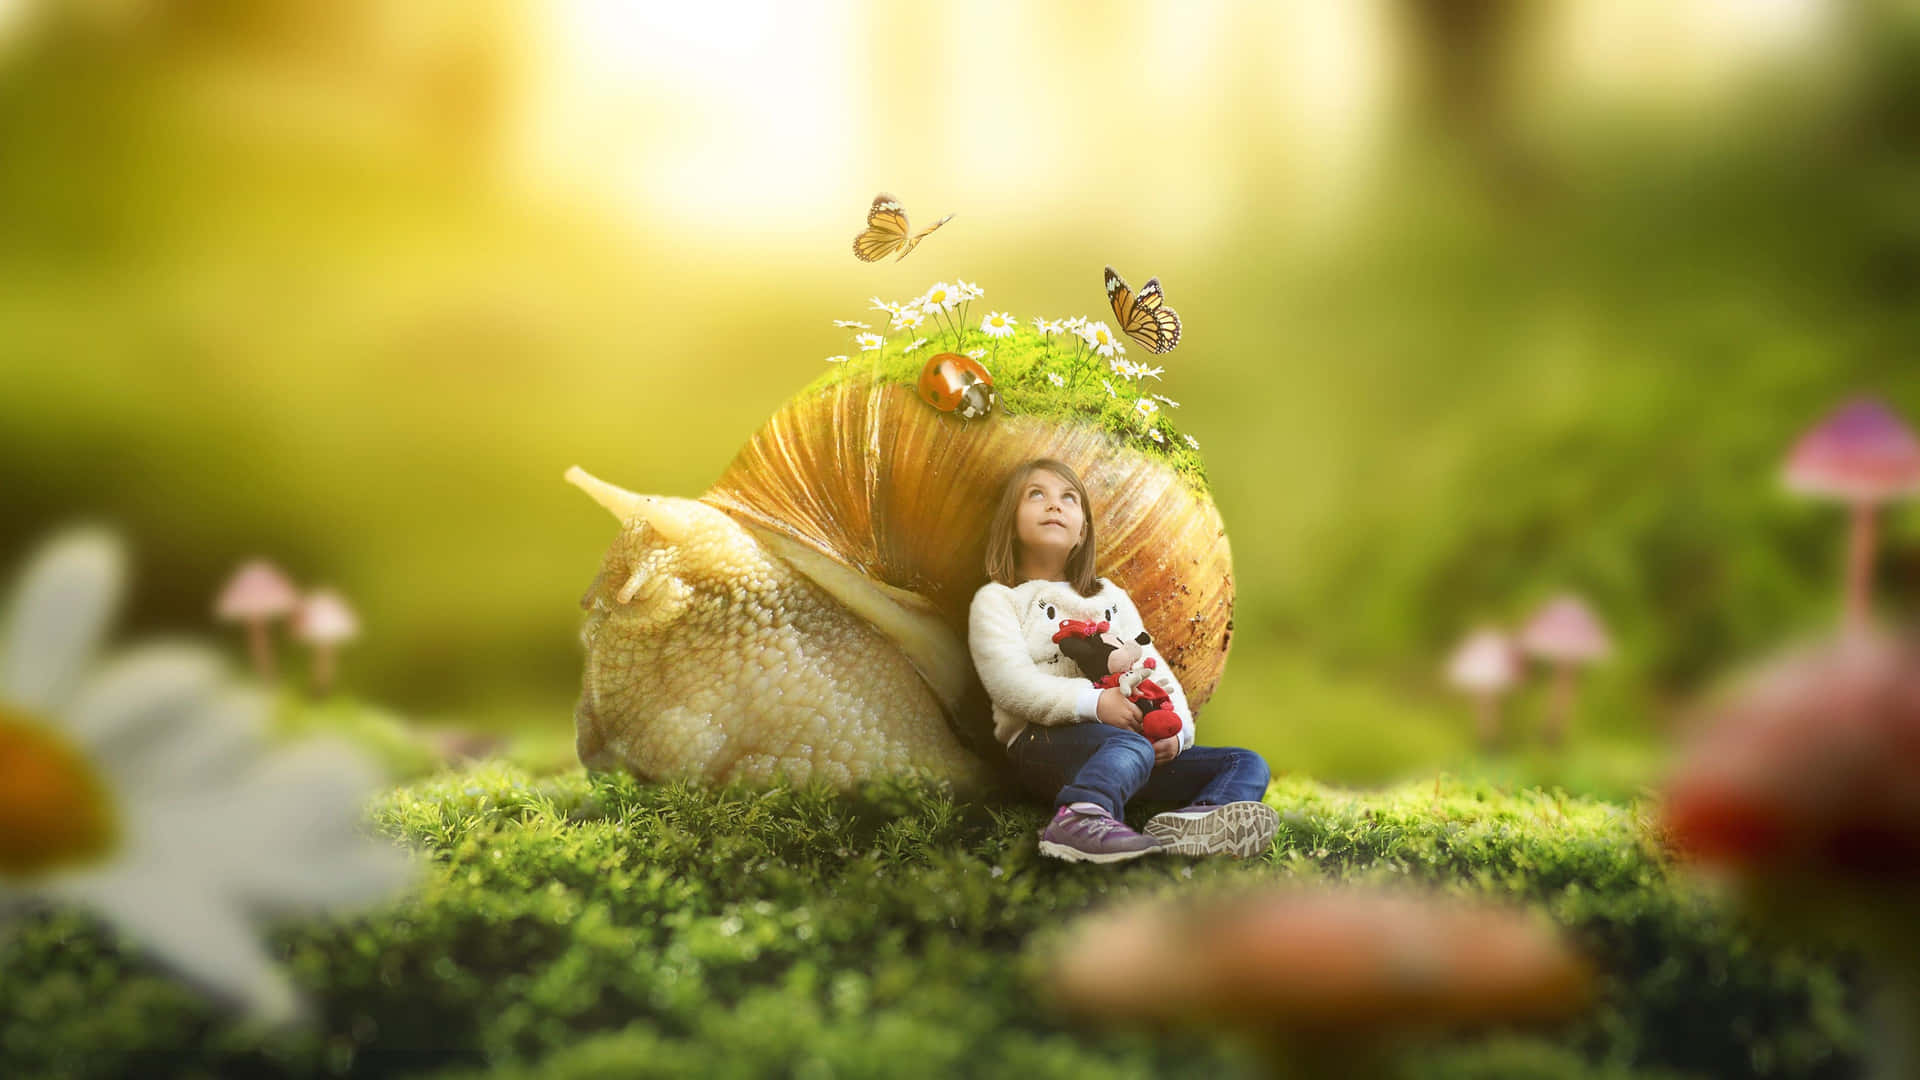 A Girl Sitting On A Snail In The Grass Background